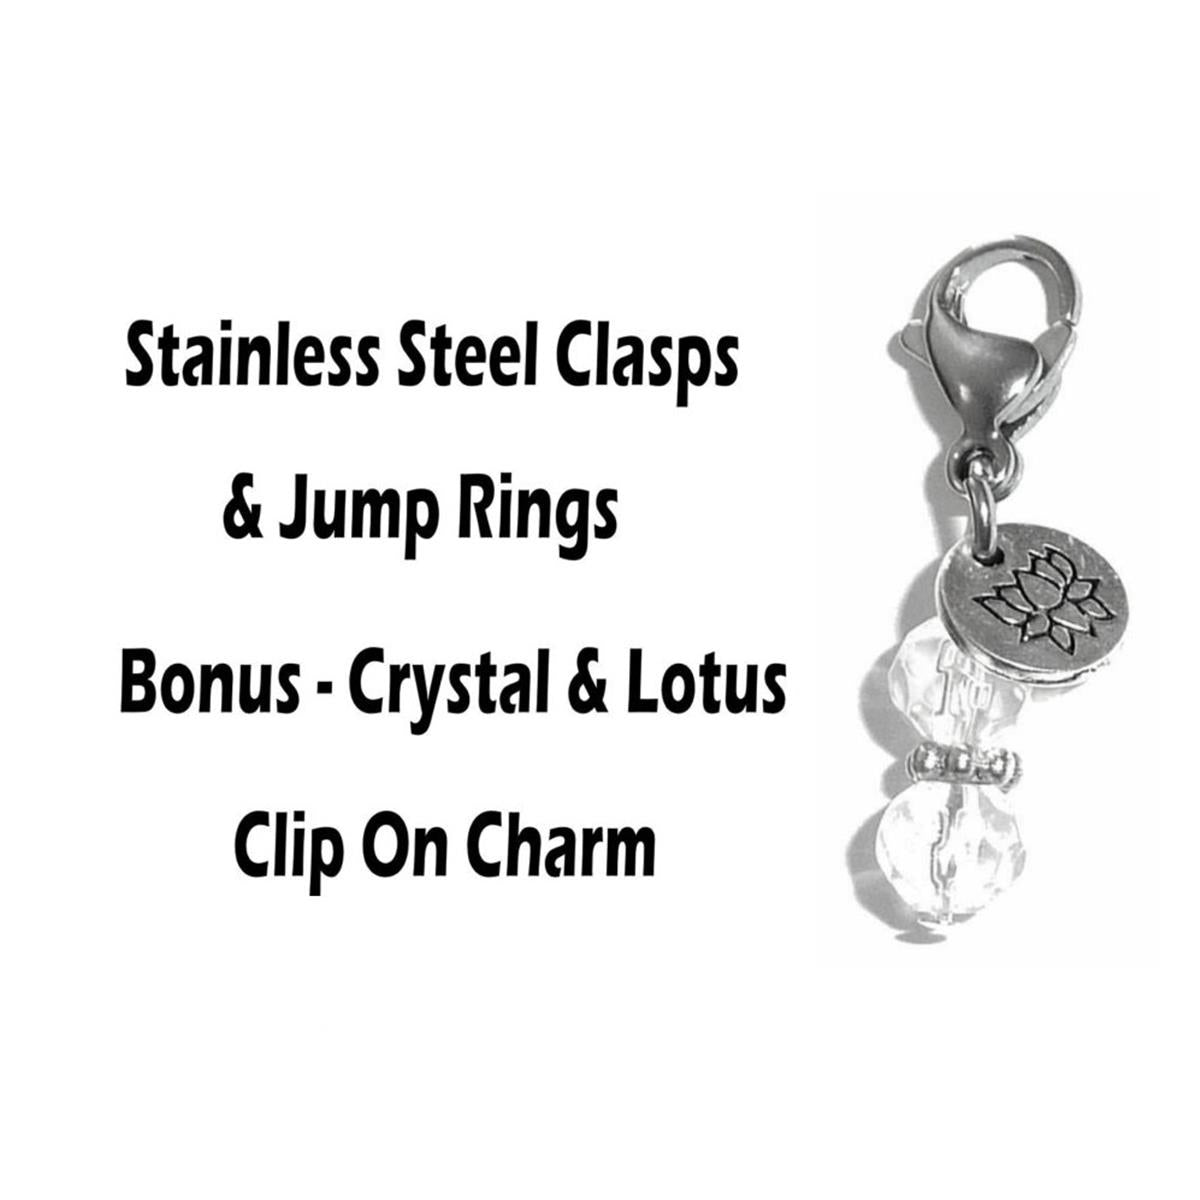 4 Pack With You Always Clip On Charms - Inspirational Charms Clip On Anywhere